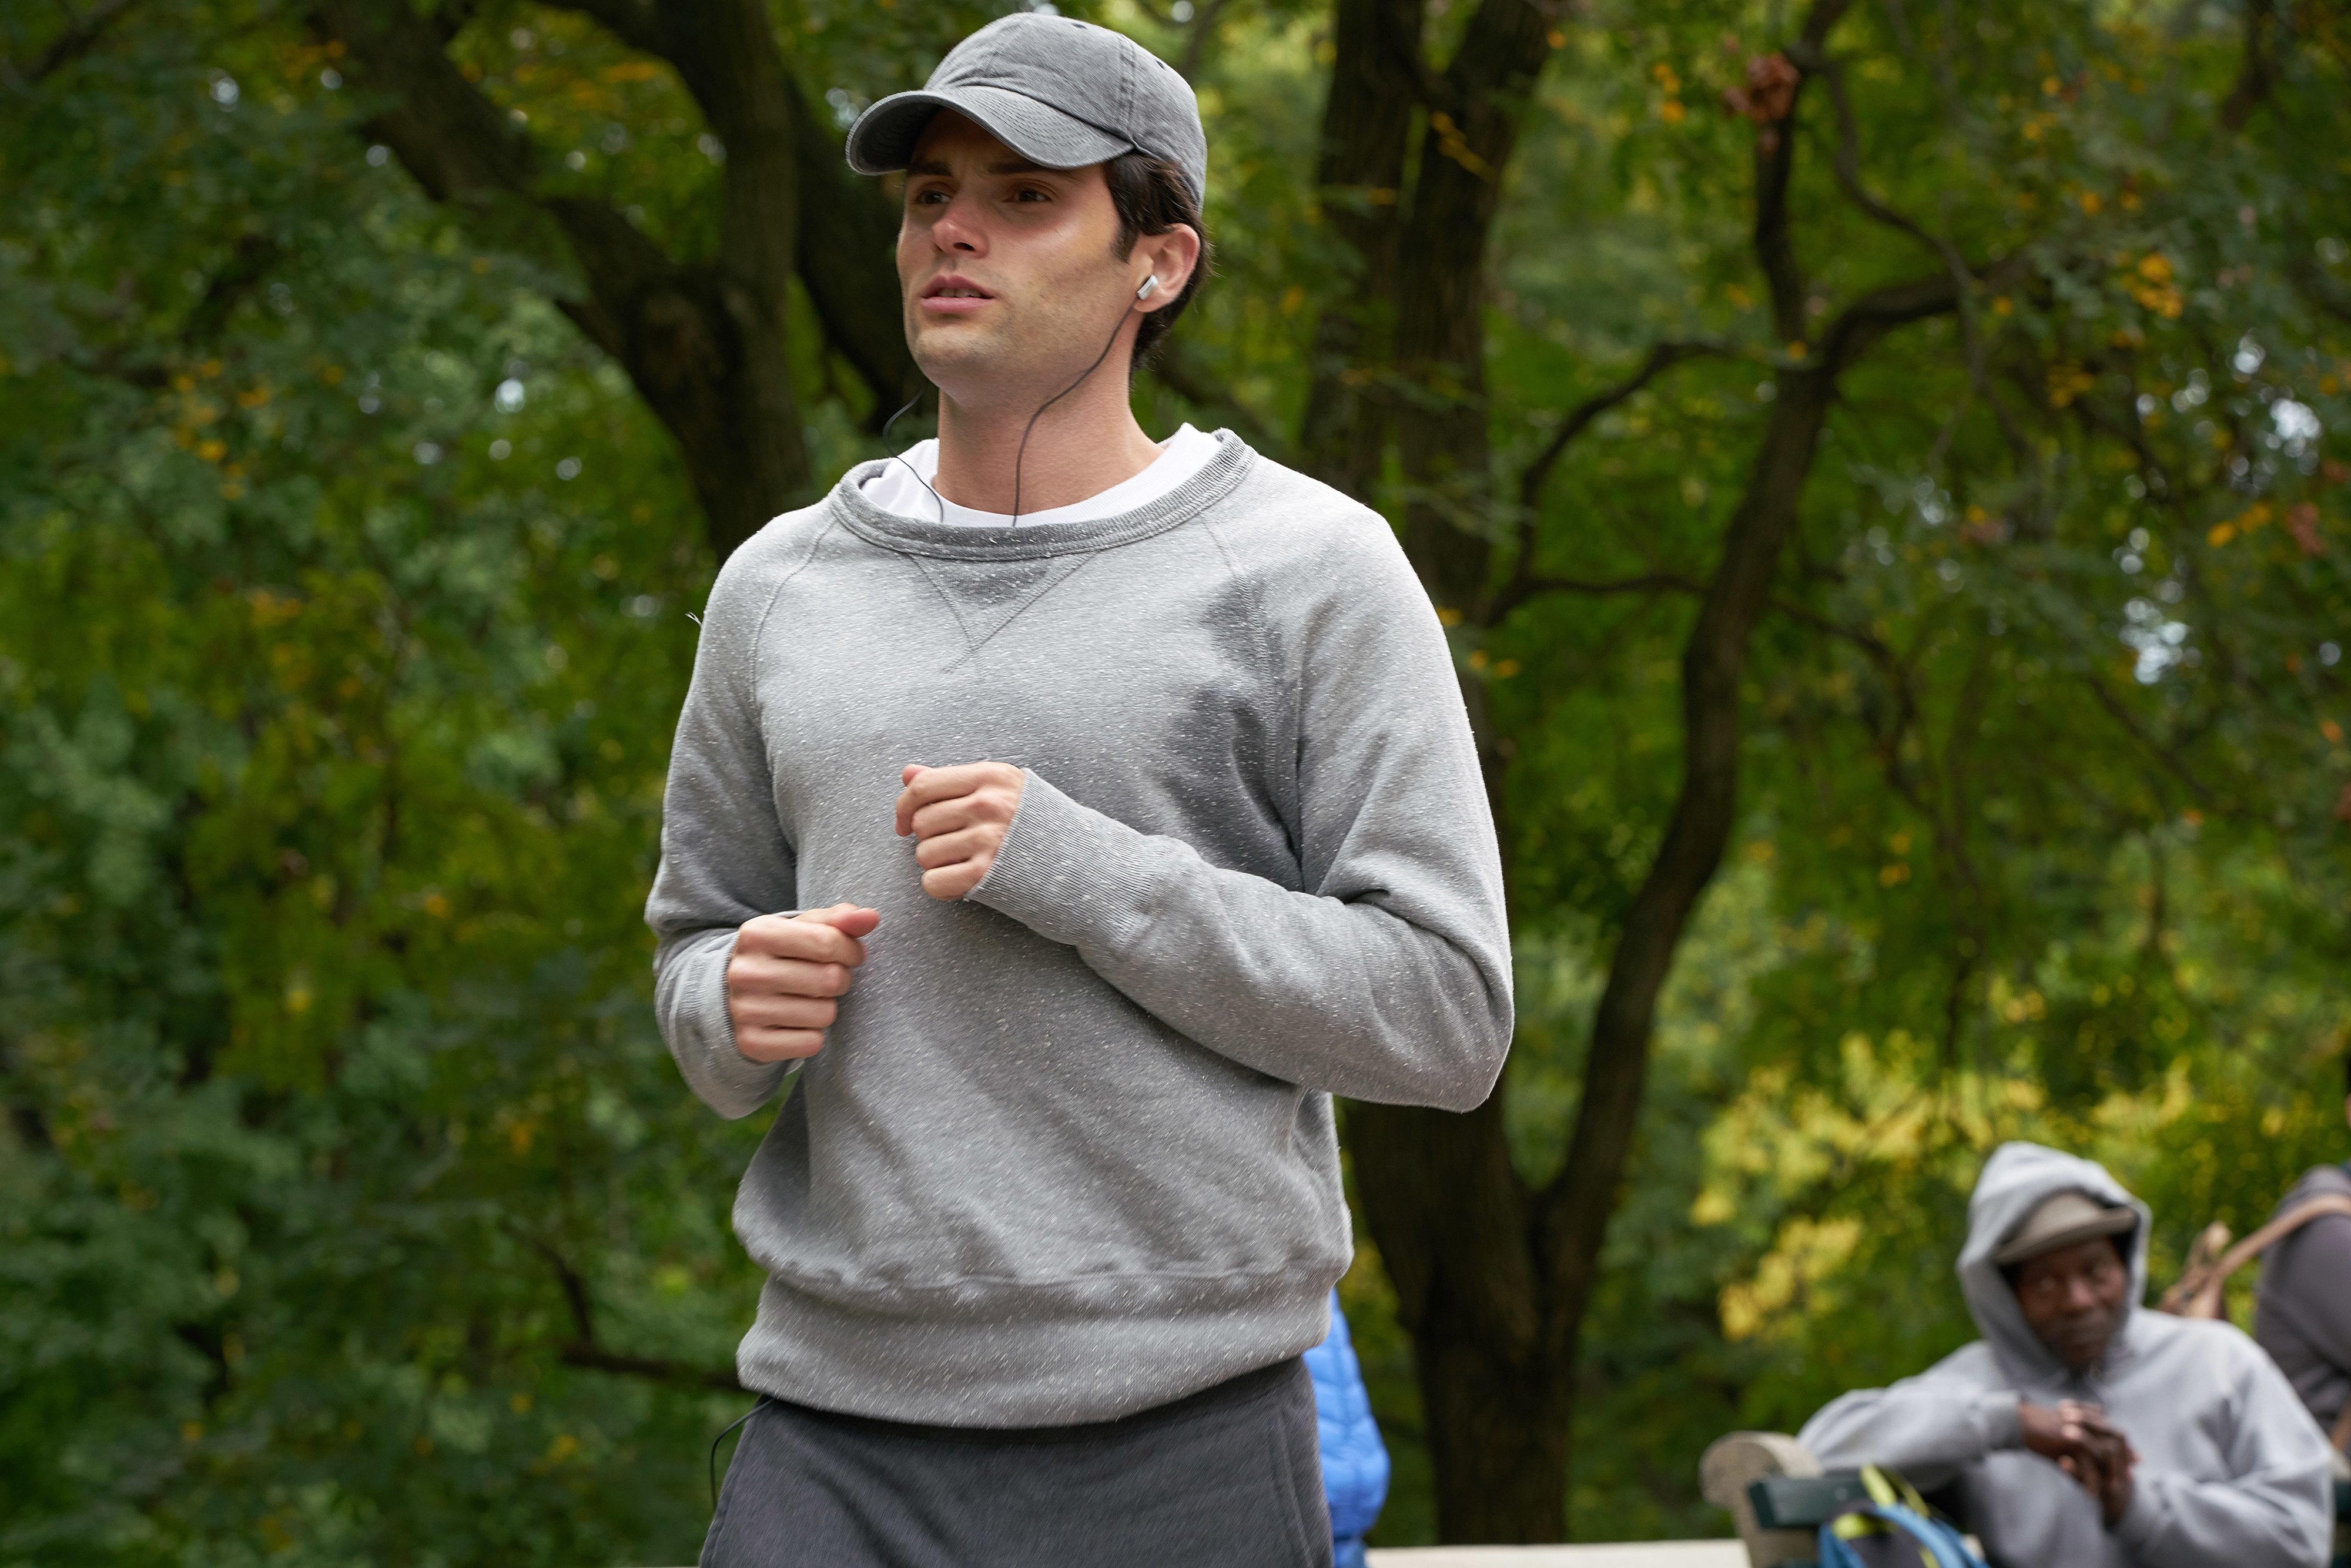 Joe in a hoodie and baseball cap on a jog through a park with onlookers